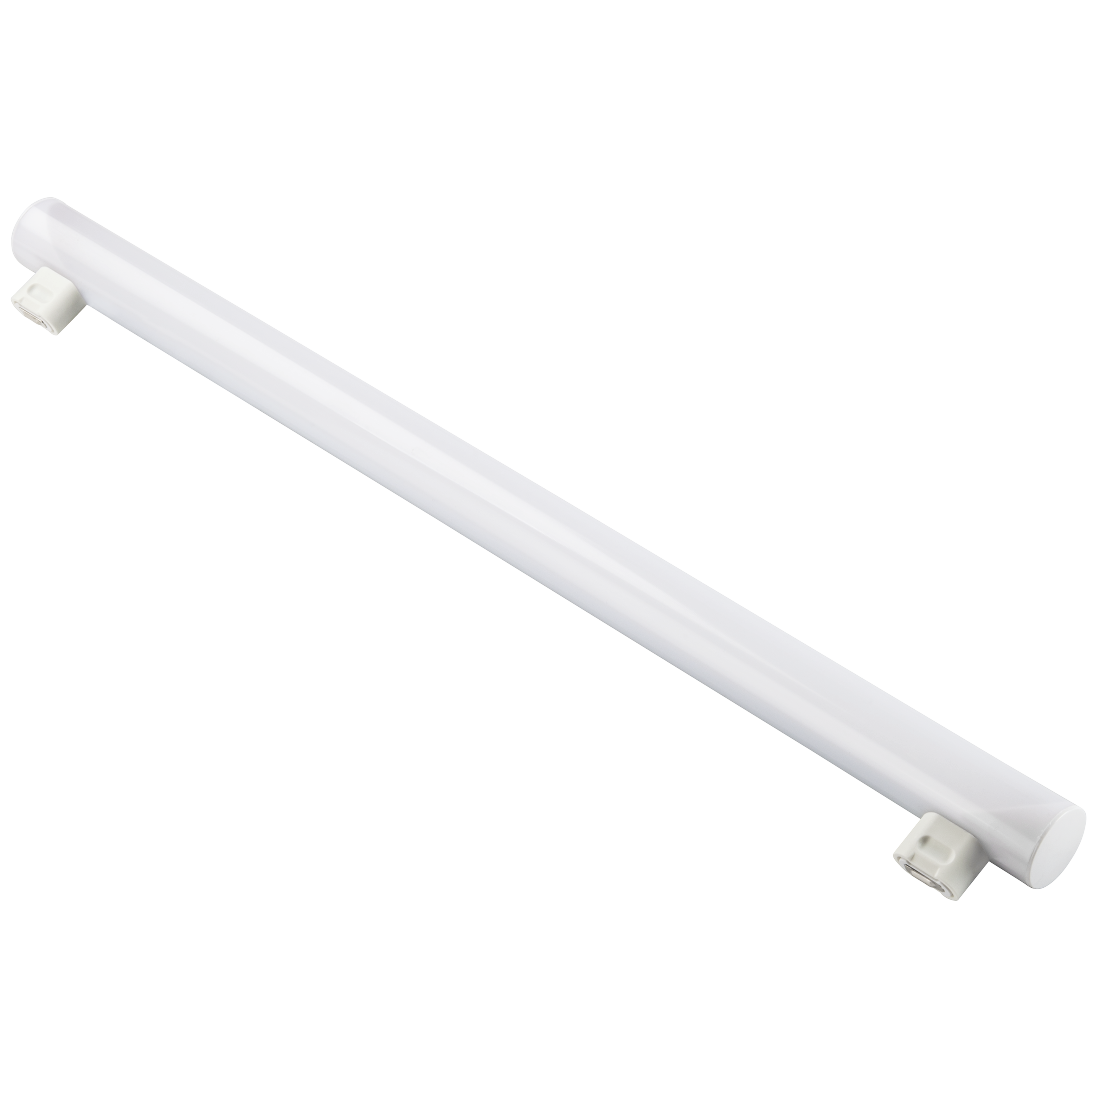 abx2 High-Res Image 2 - Xavax, LED Lamp, S14s, 640 lm Replaces 50 W, Linear Lamp, 50 cm, warm white